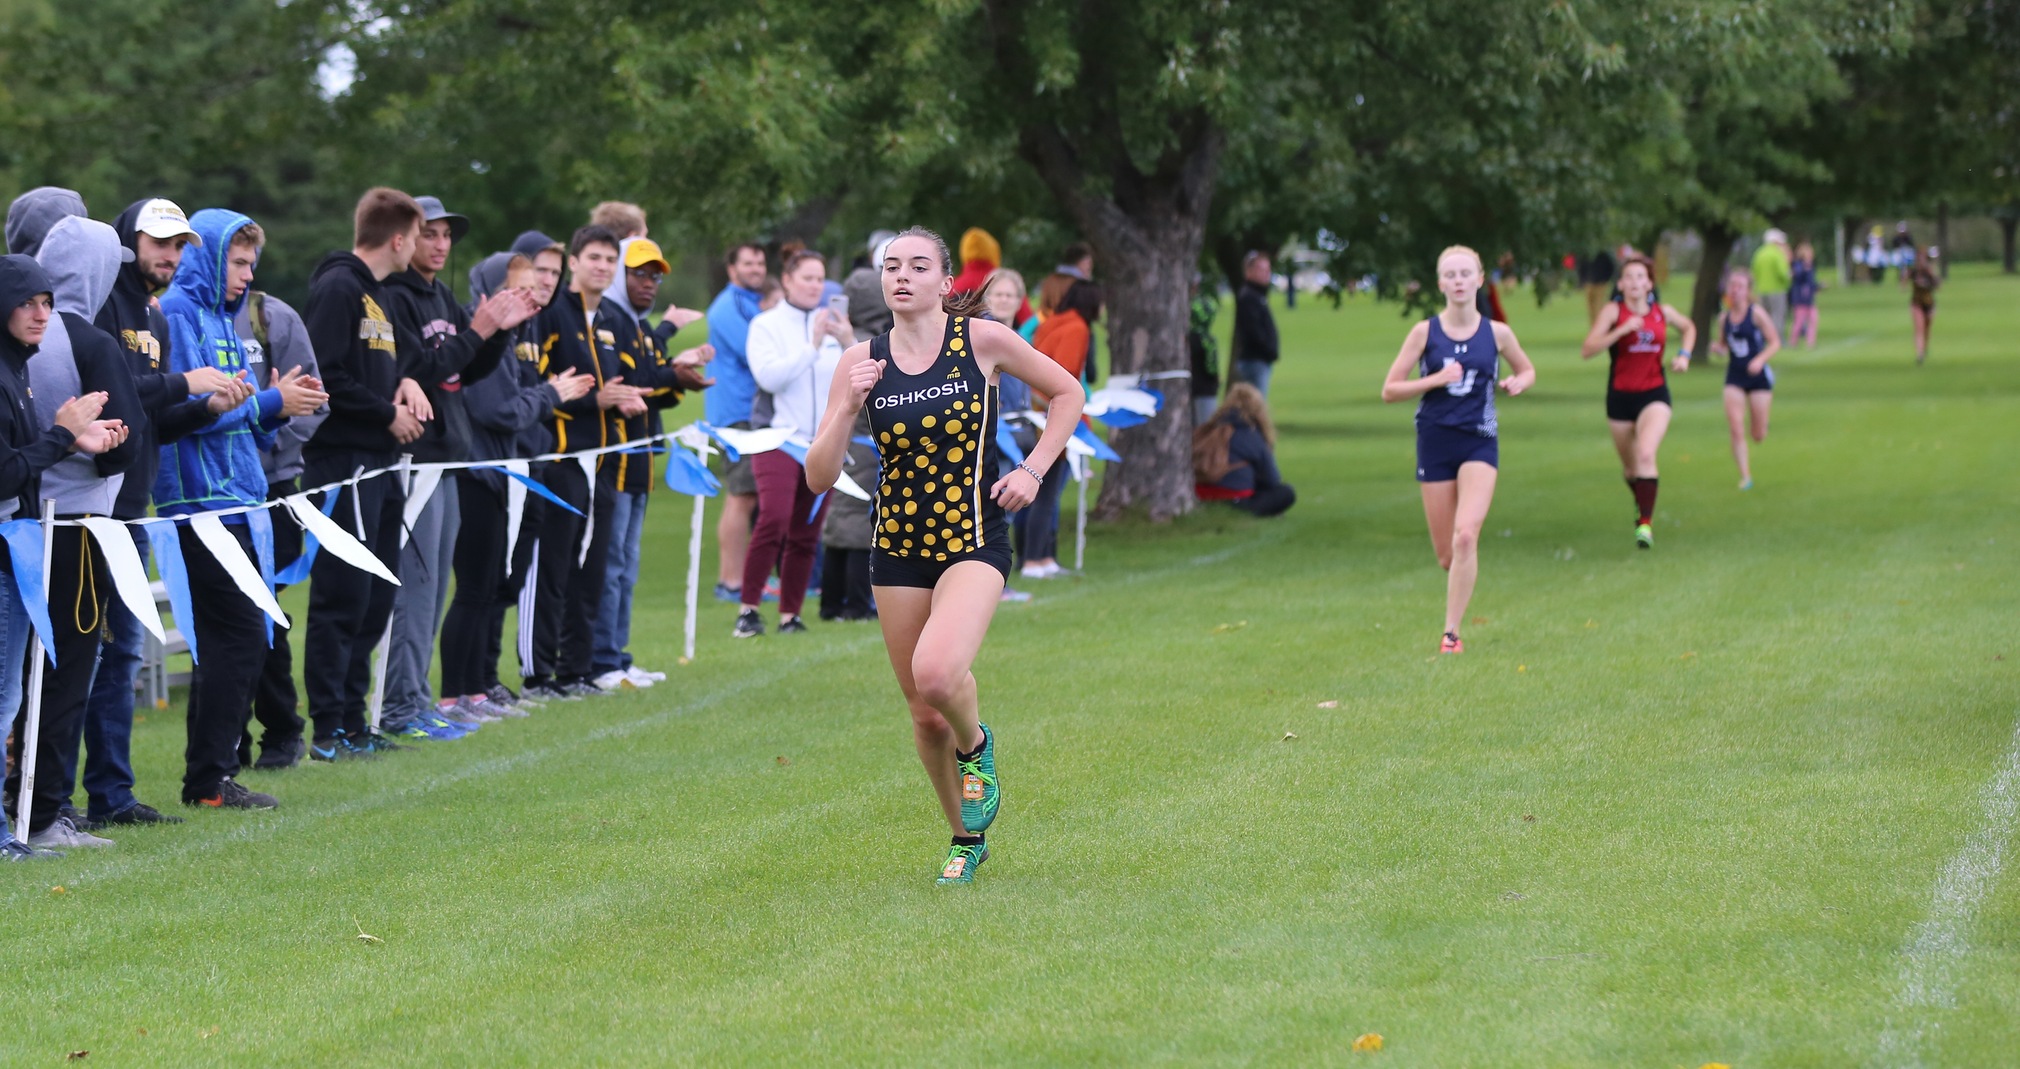 Hannah Lohrenz earned her second-best finish of the season with a sixth-place listing in Appleton.